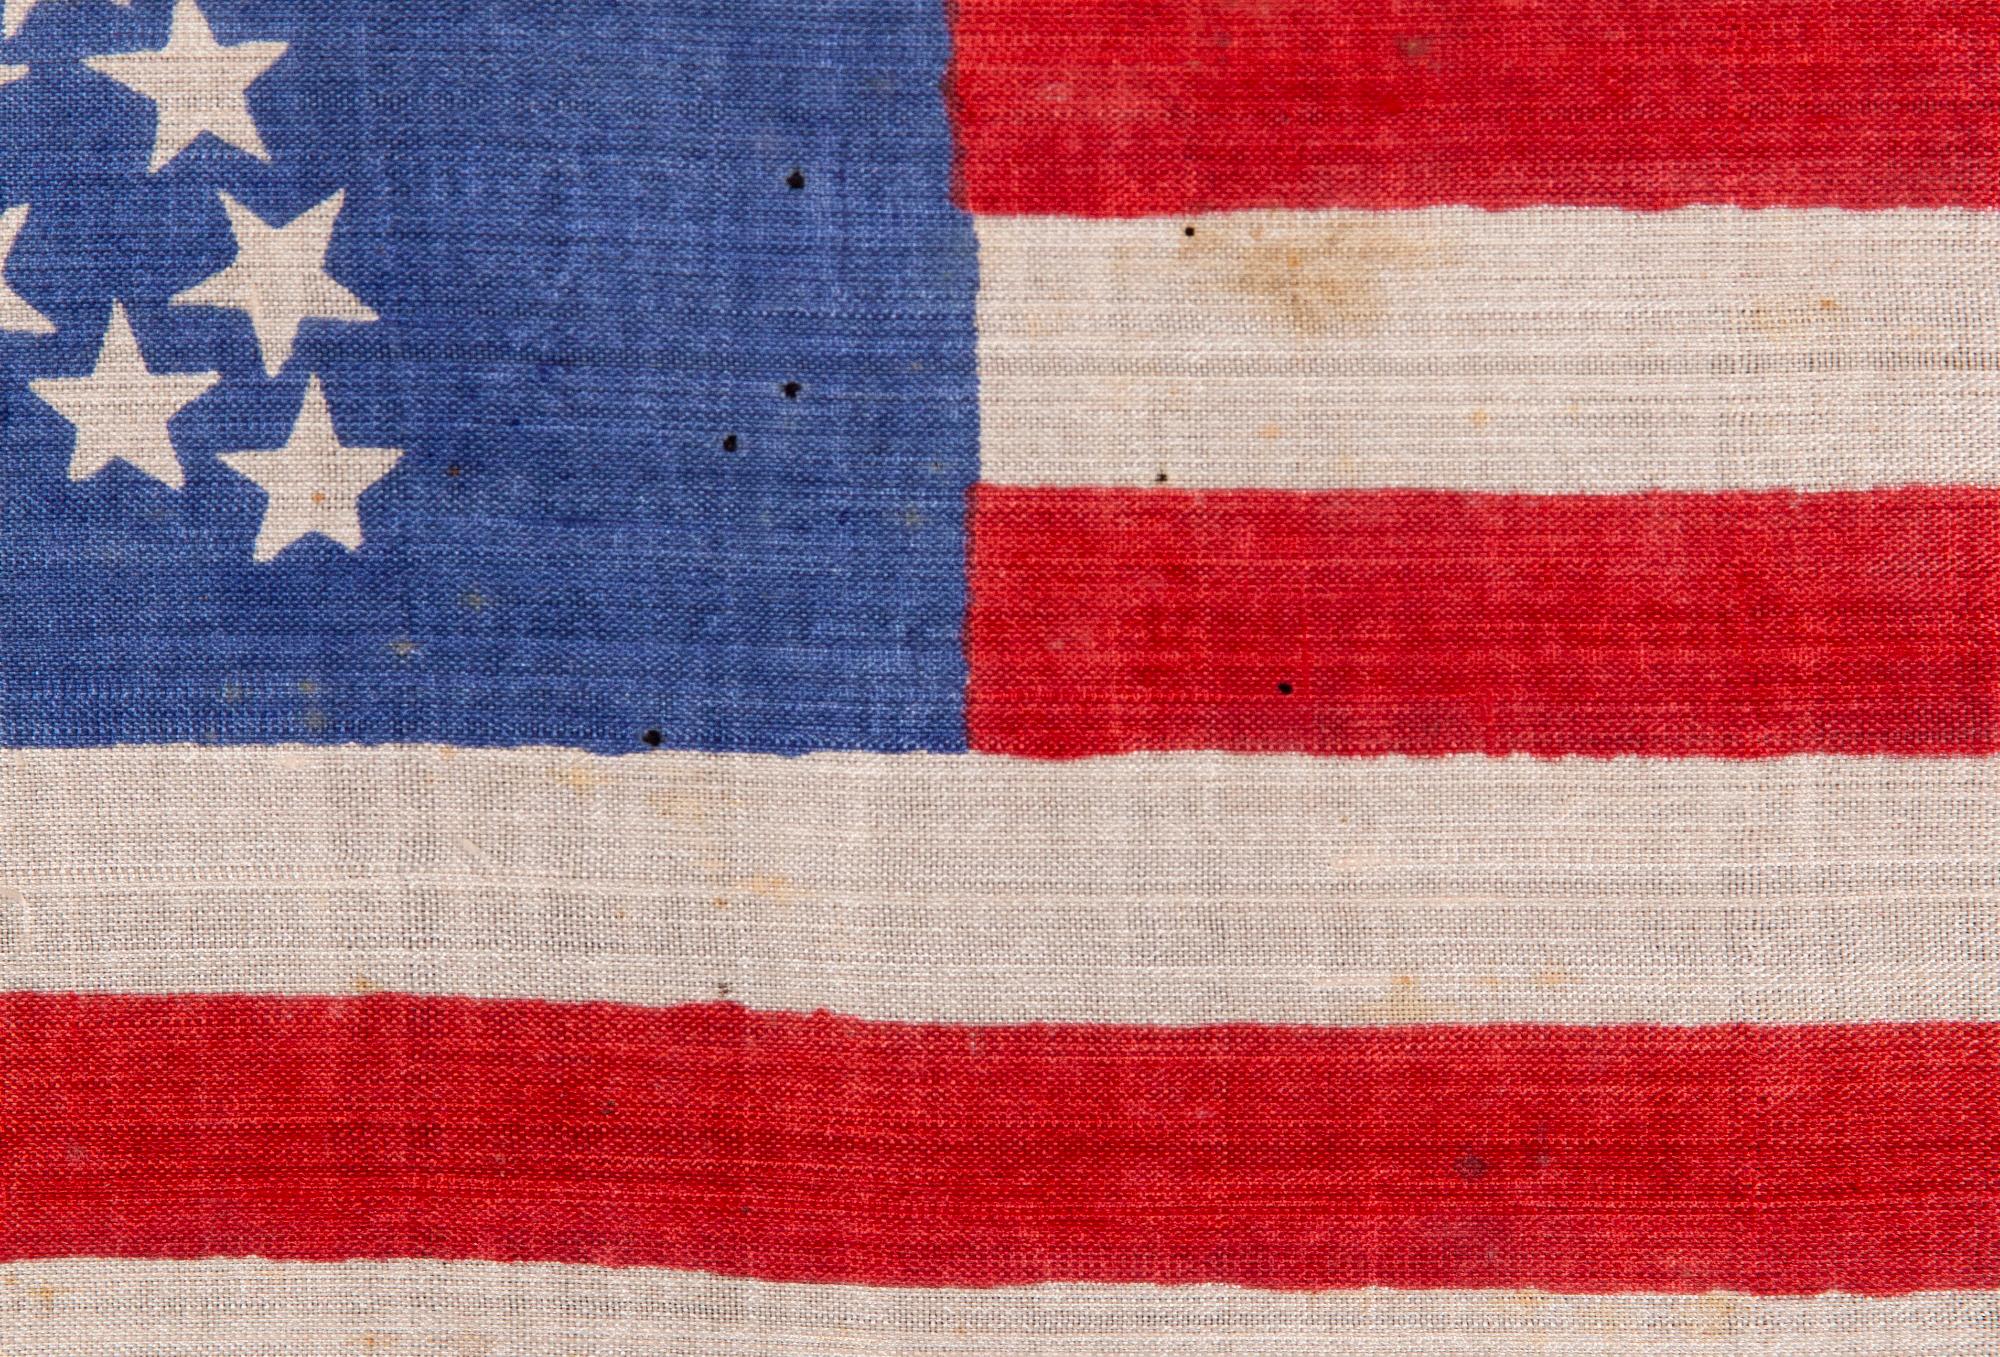 American 33 Star Flag with Stars in a 